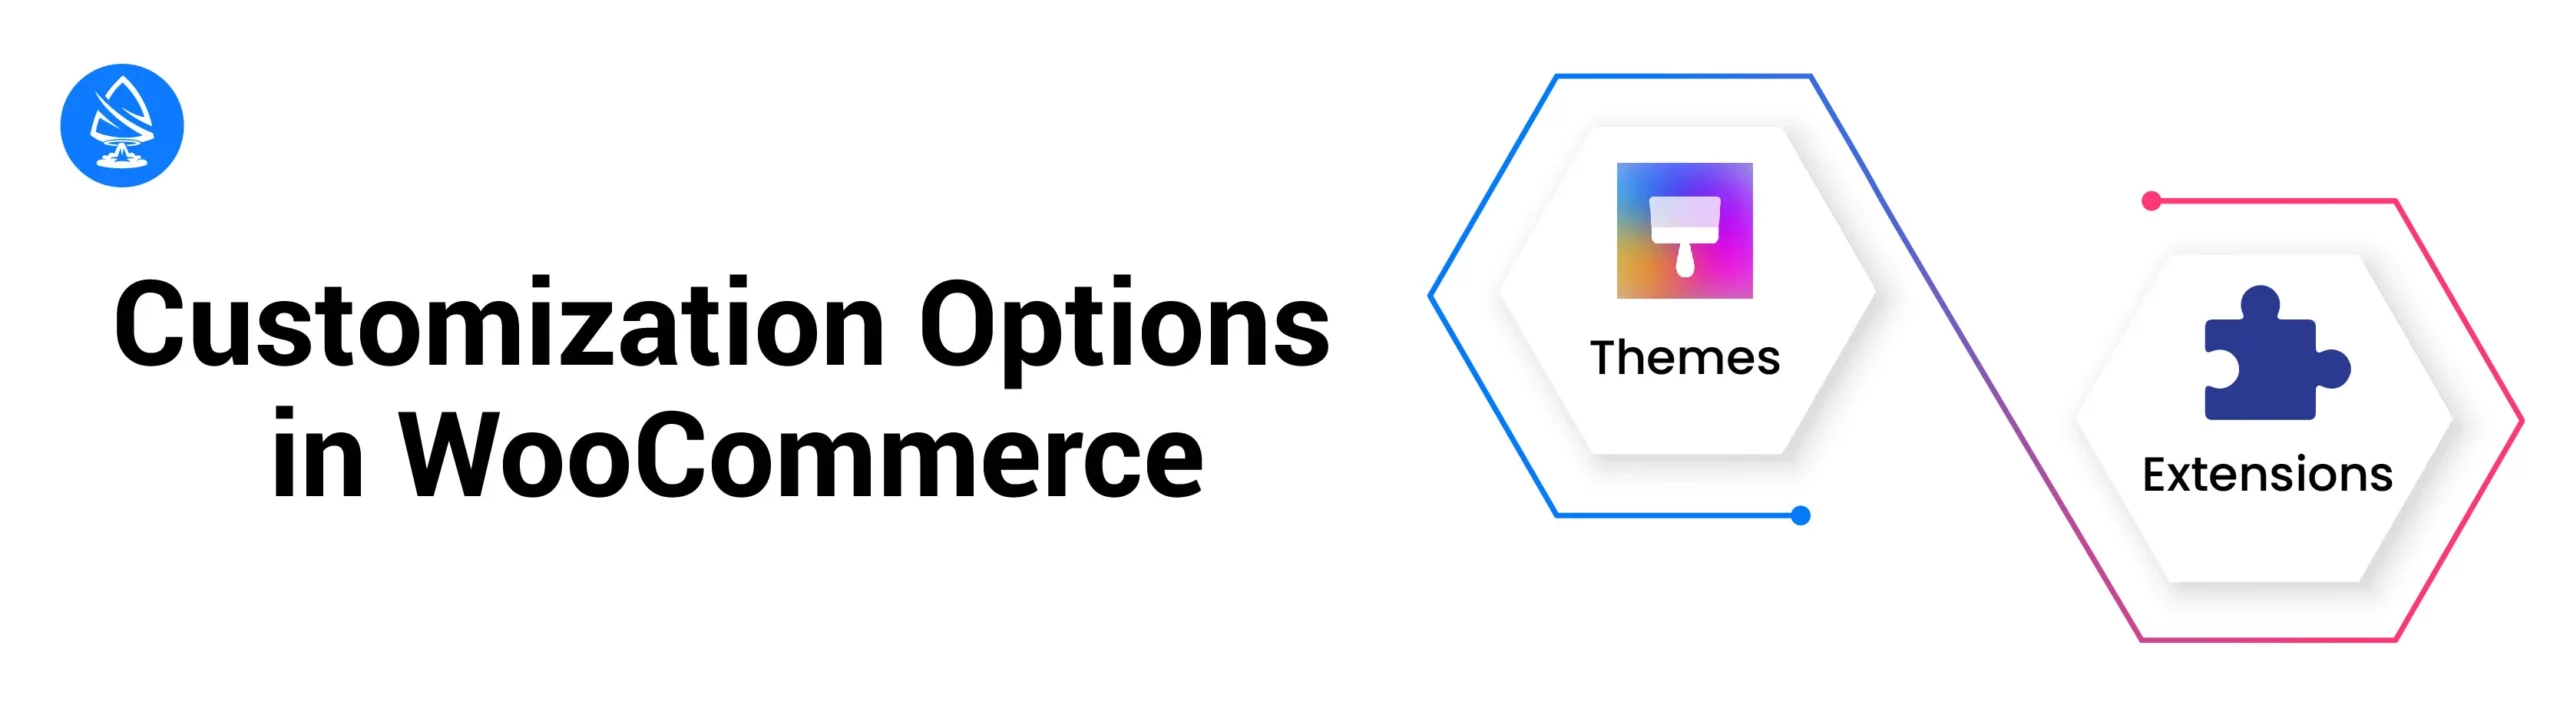 Customization Options in Woo Commerce